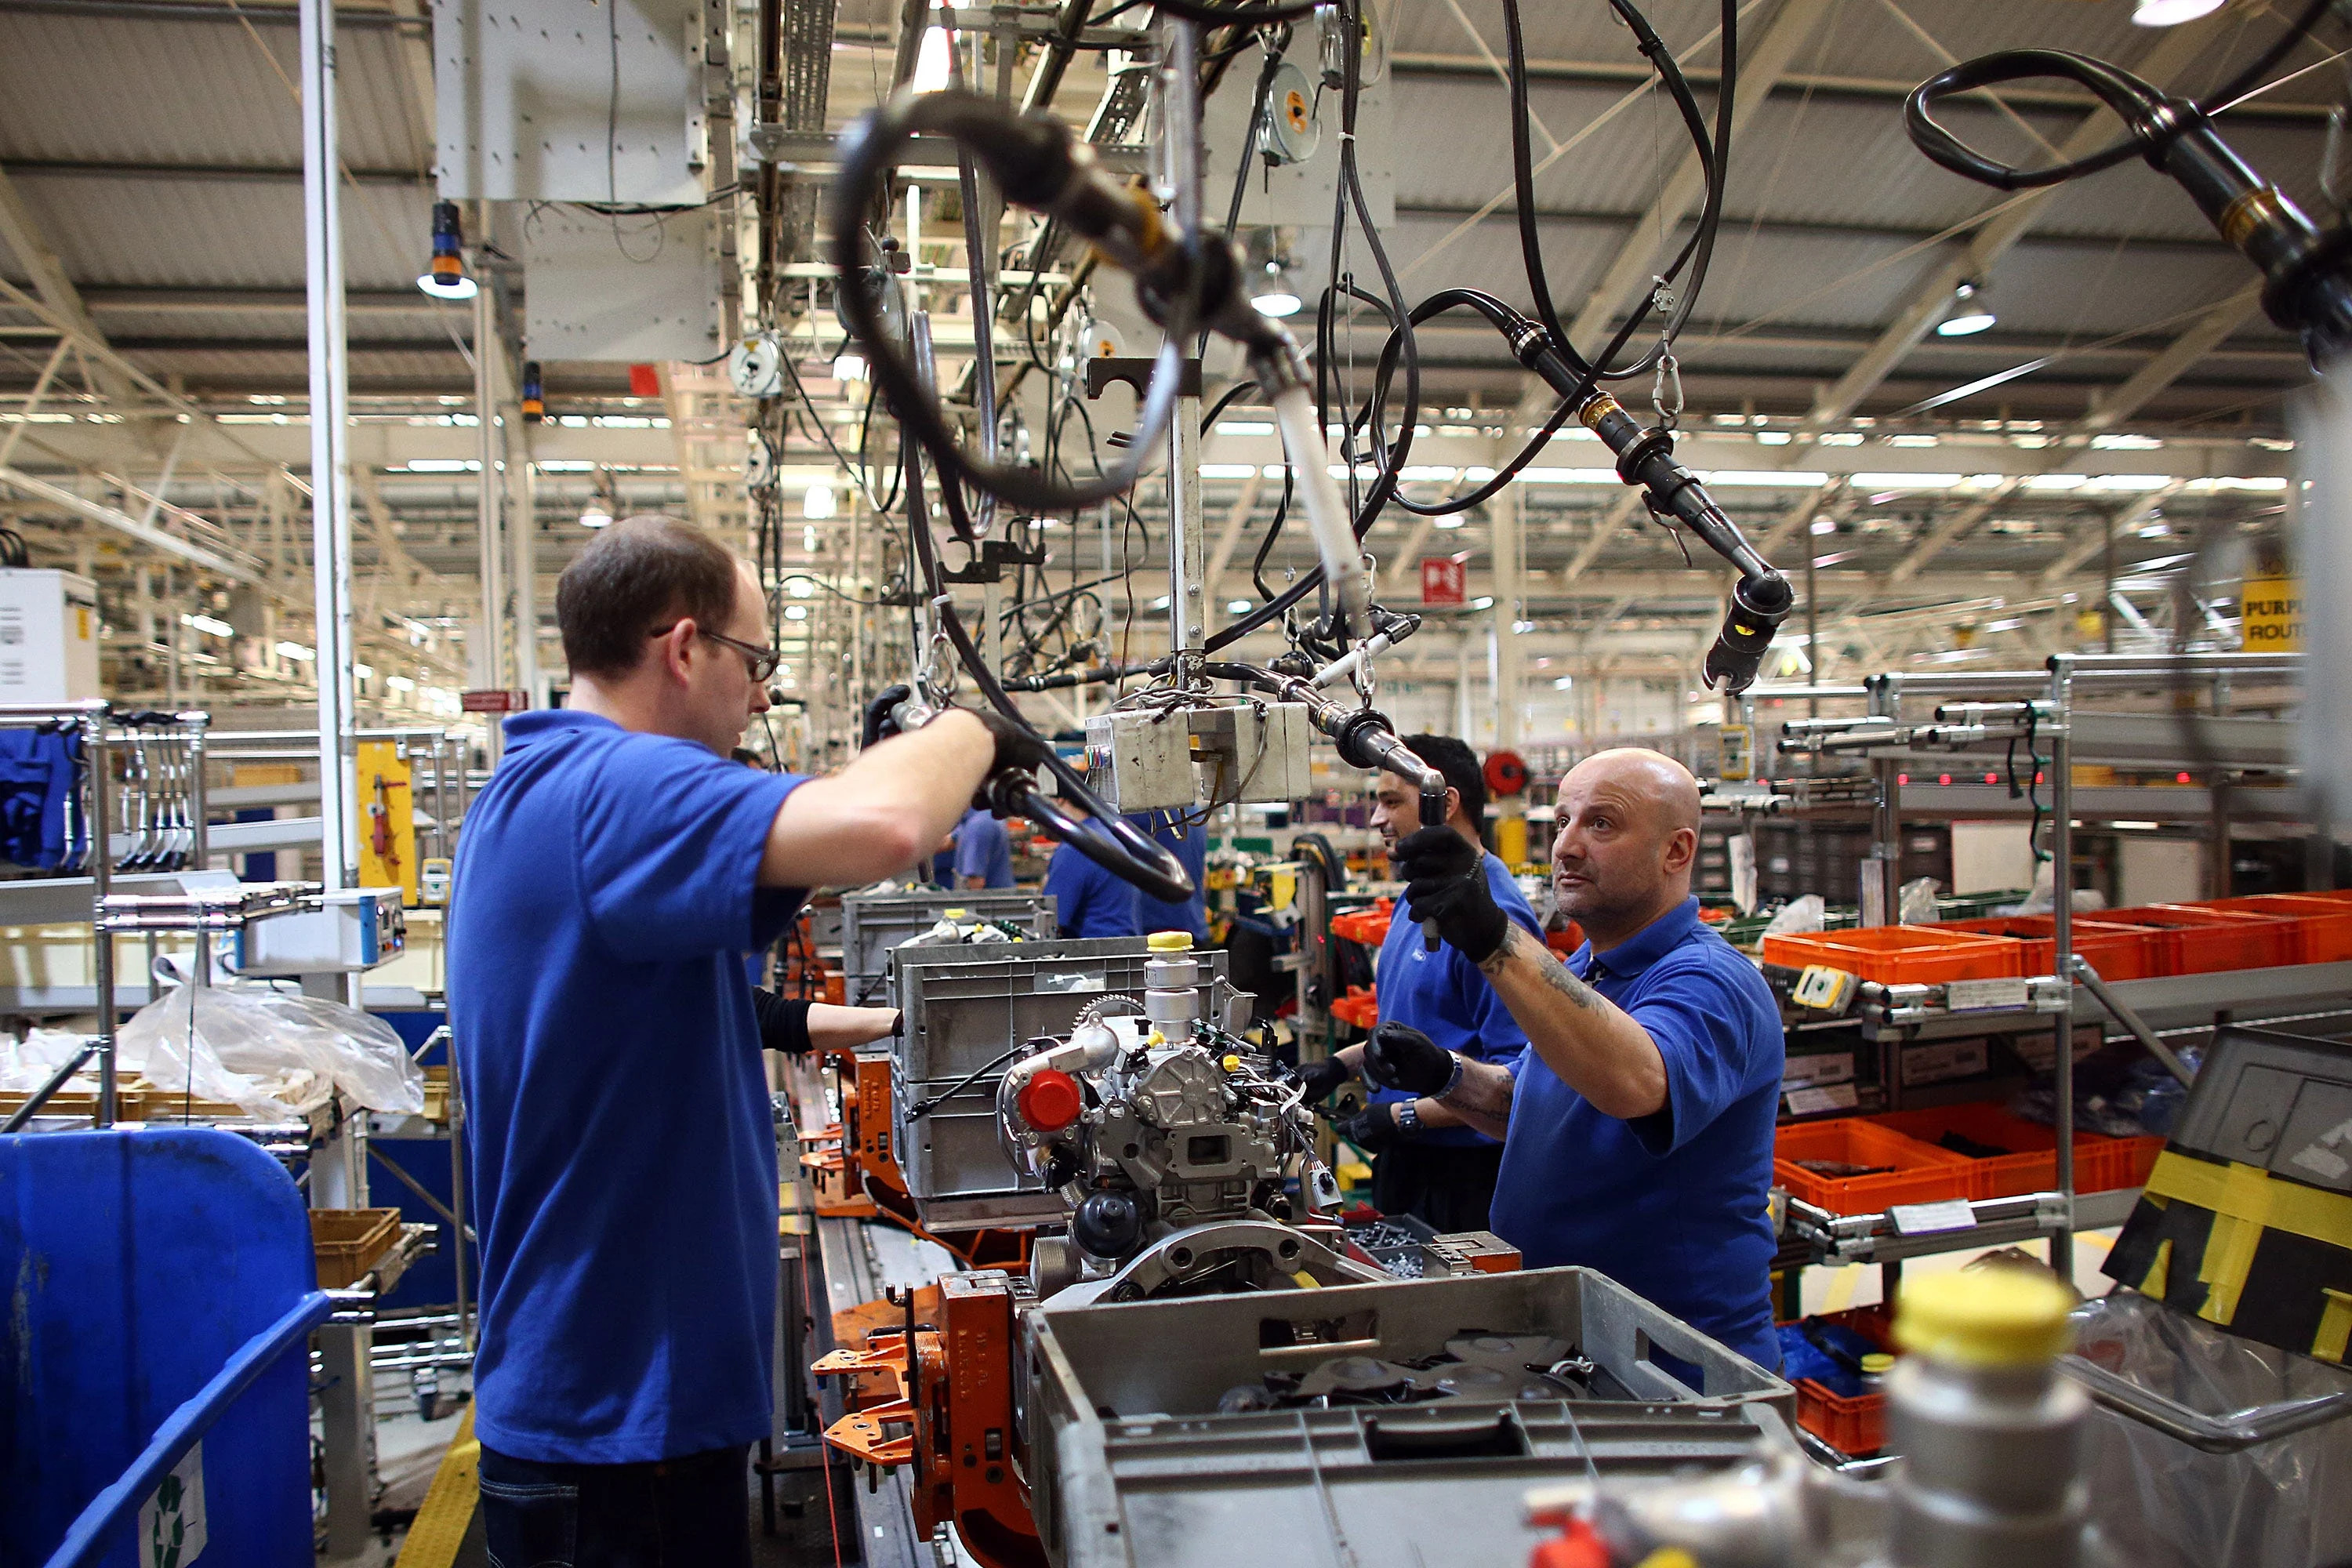 Employees work on an engine production line at a Ford factory on January 13, 2015 in Dagenham, England.